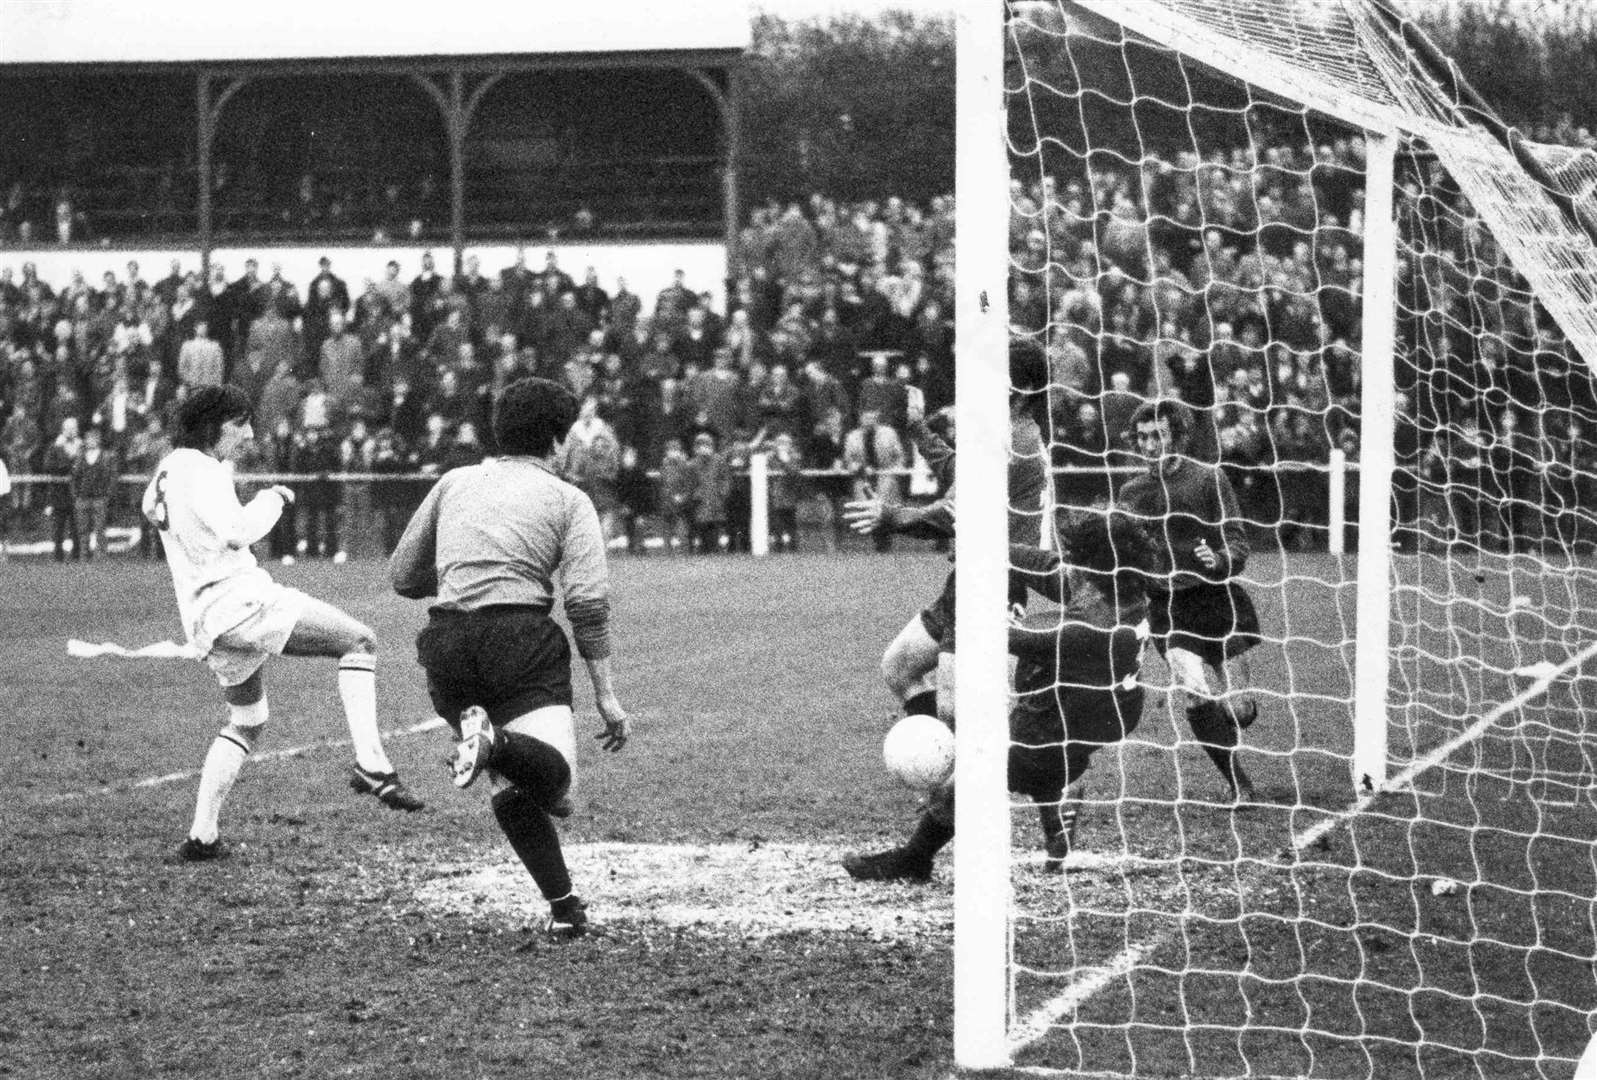 Maidstone United against Faversham Town in the 1970s